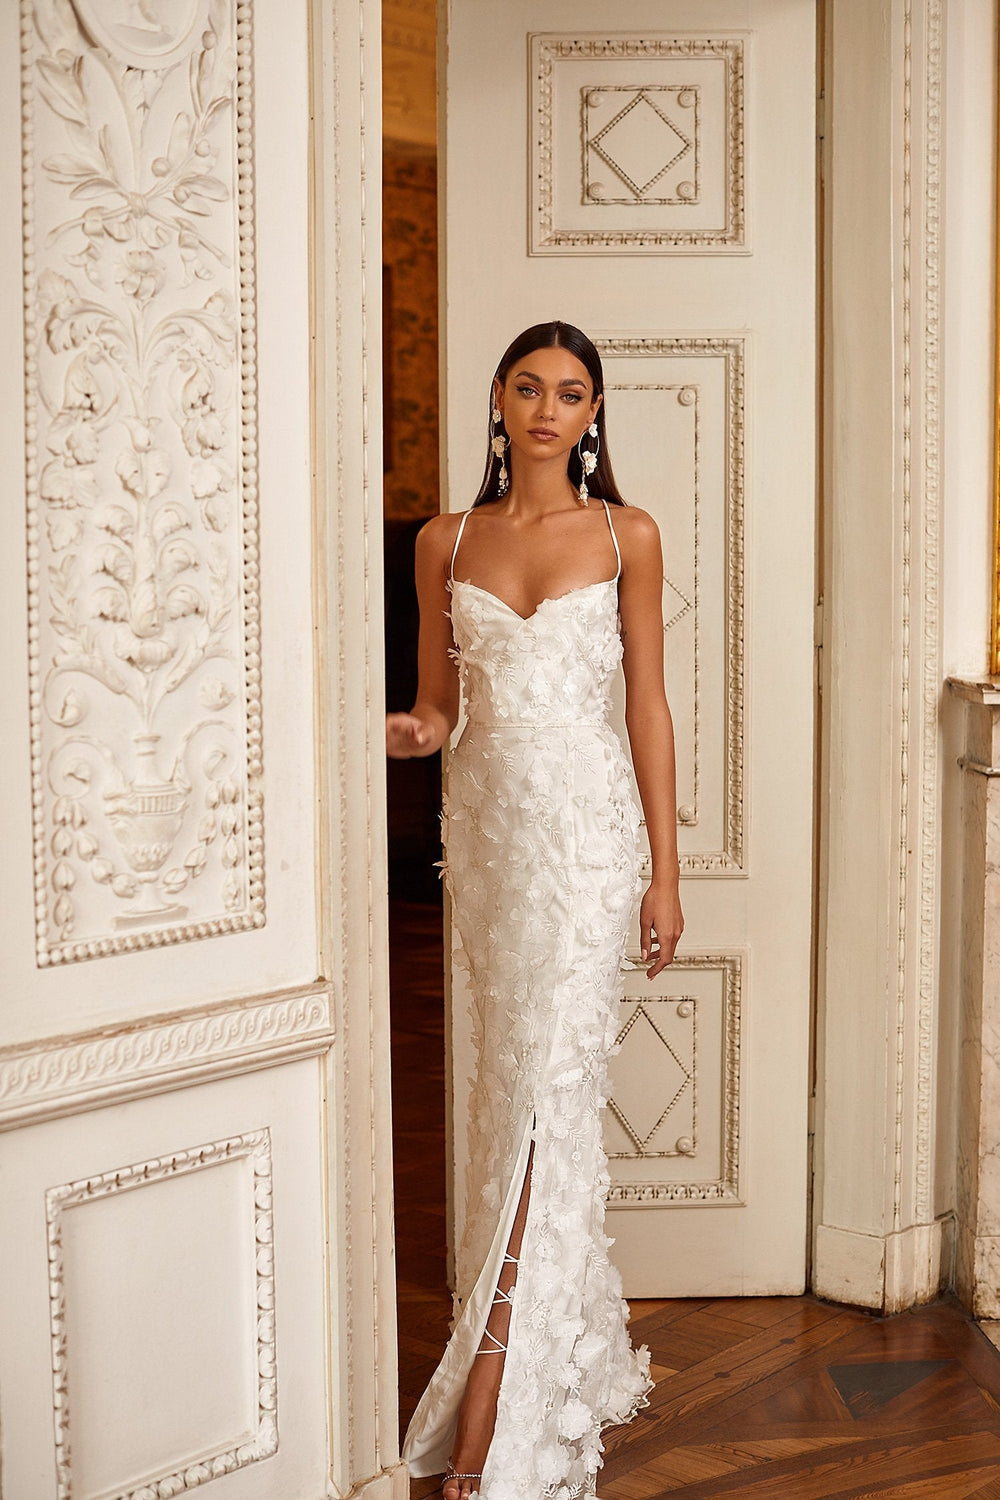 Petra White - 3D Floral Gown with Lace-Up Back & Sweetheart Neckline